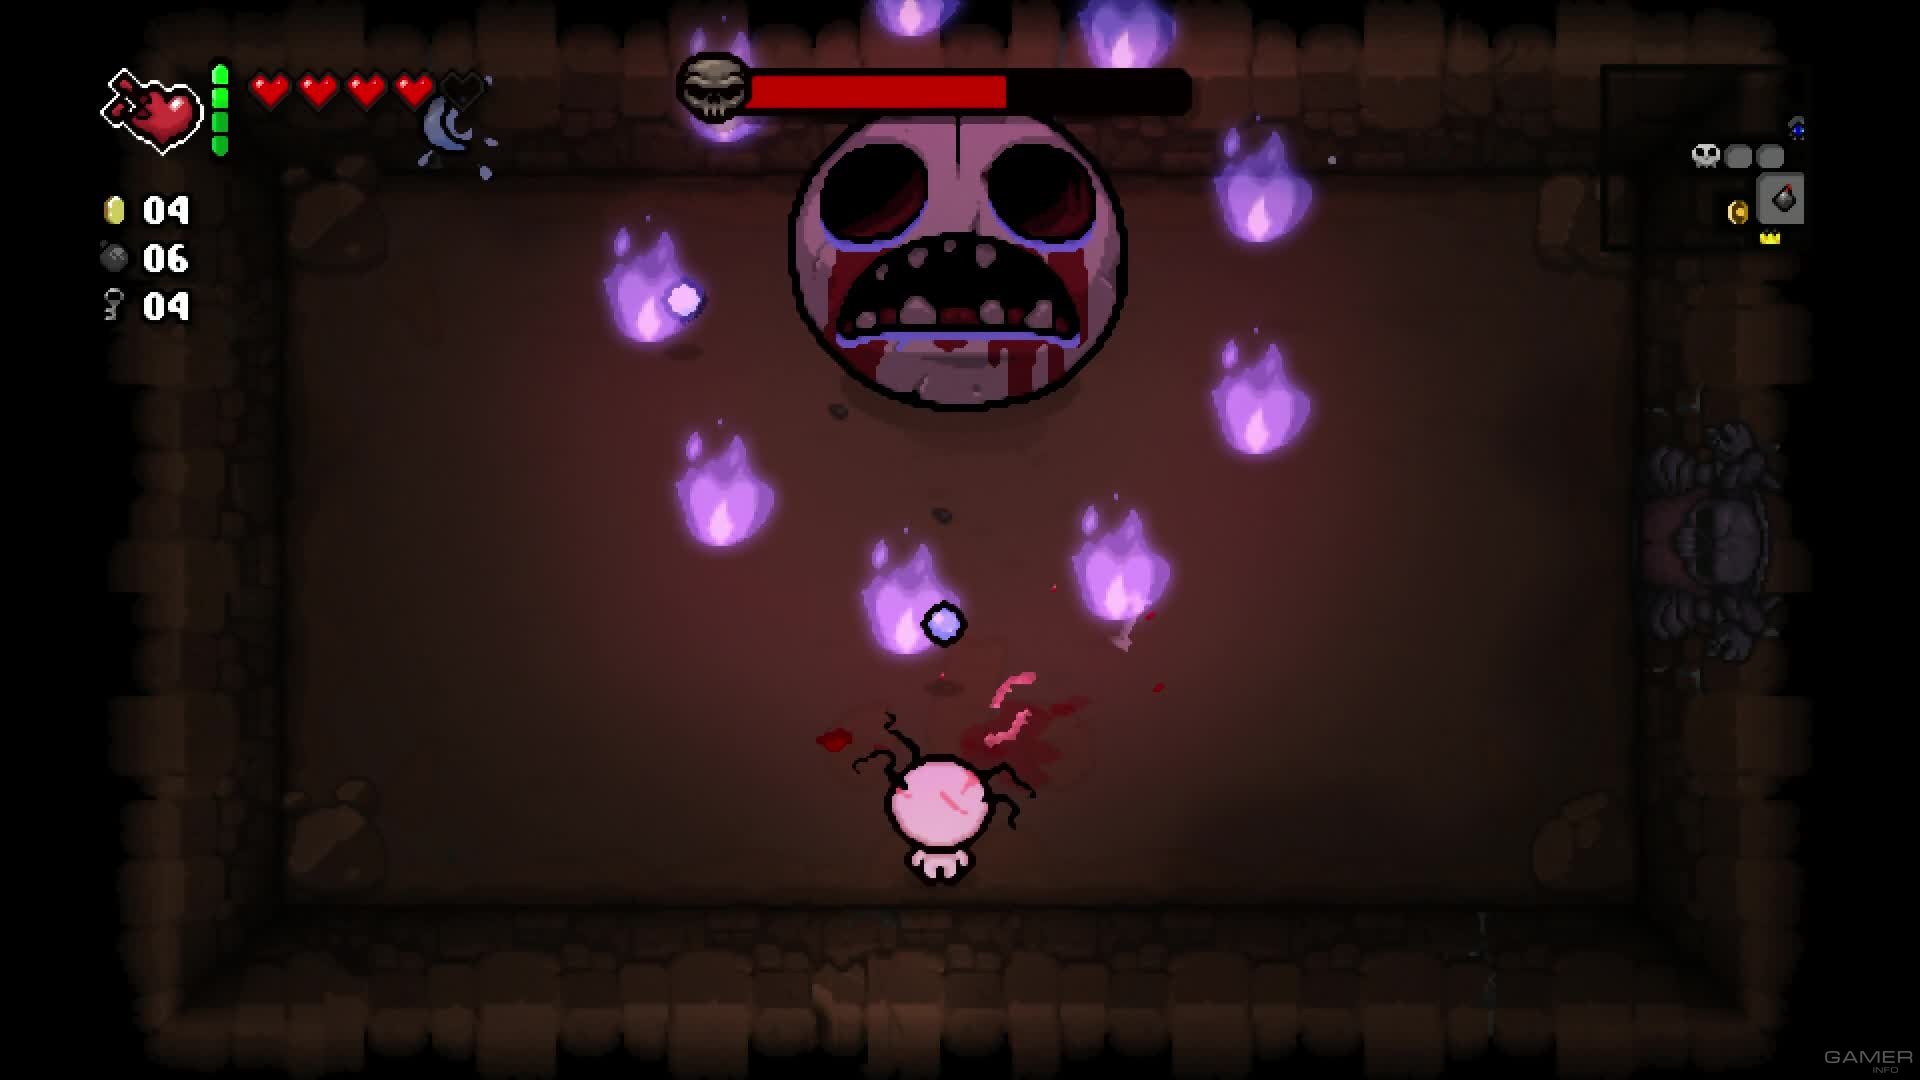 binding of isaac rebirth not responding on launch